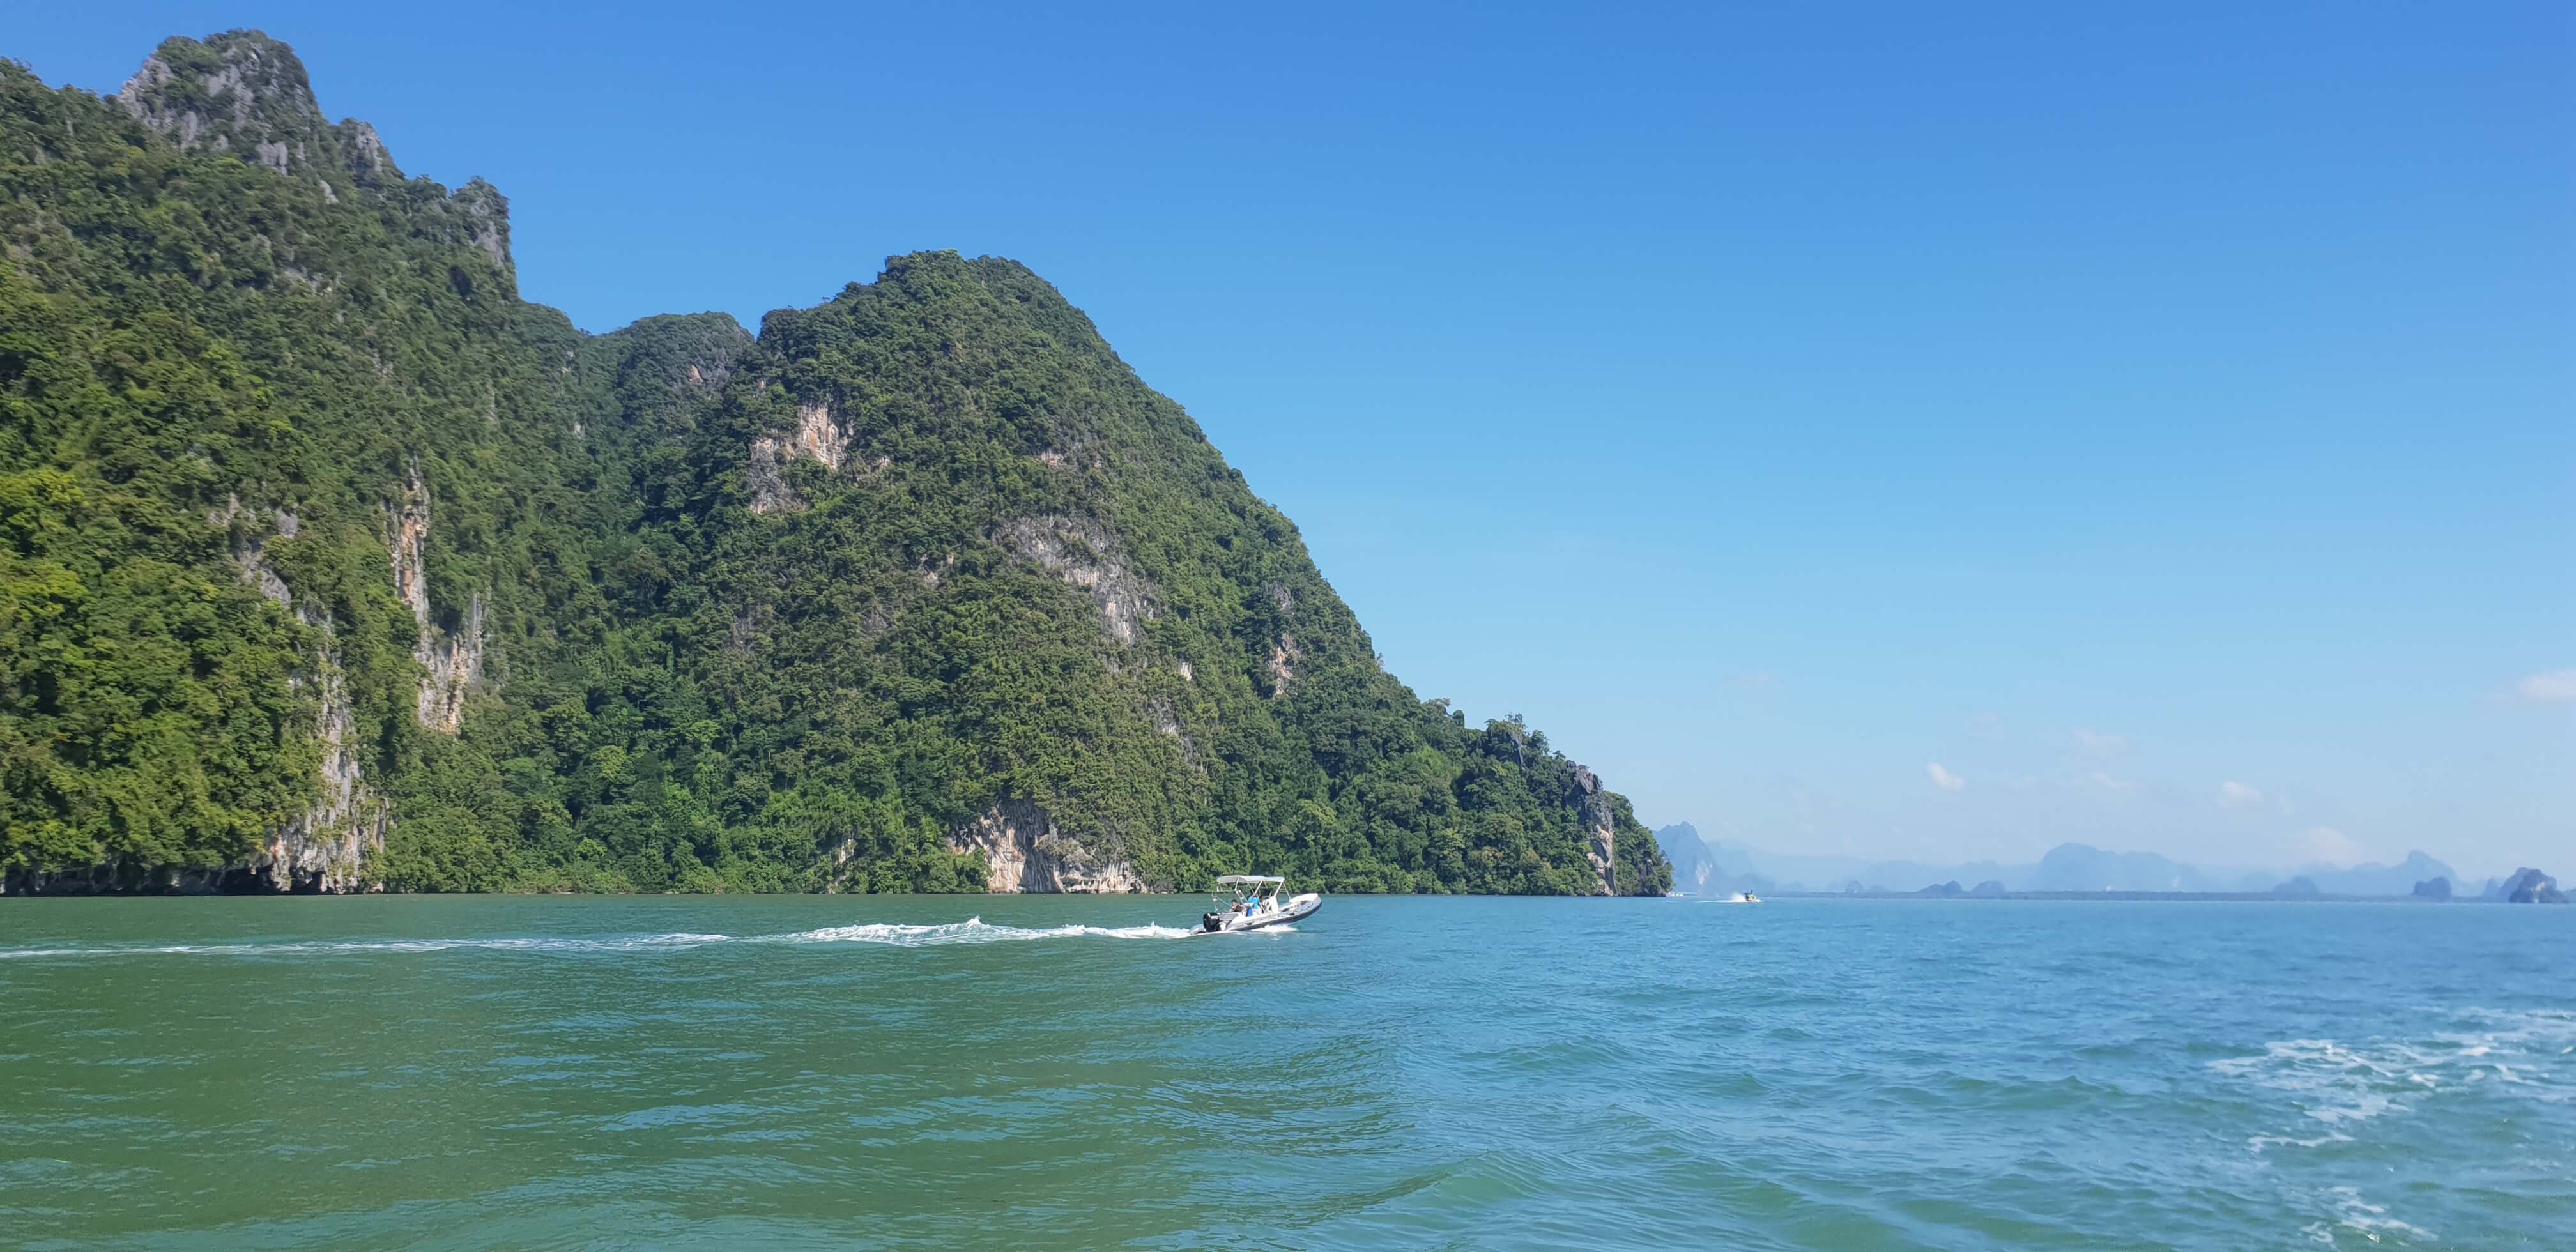 Enjoy cruising in the sea passing by hundreds of rocky limestone outcrops.